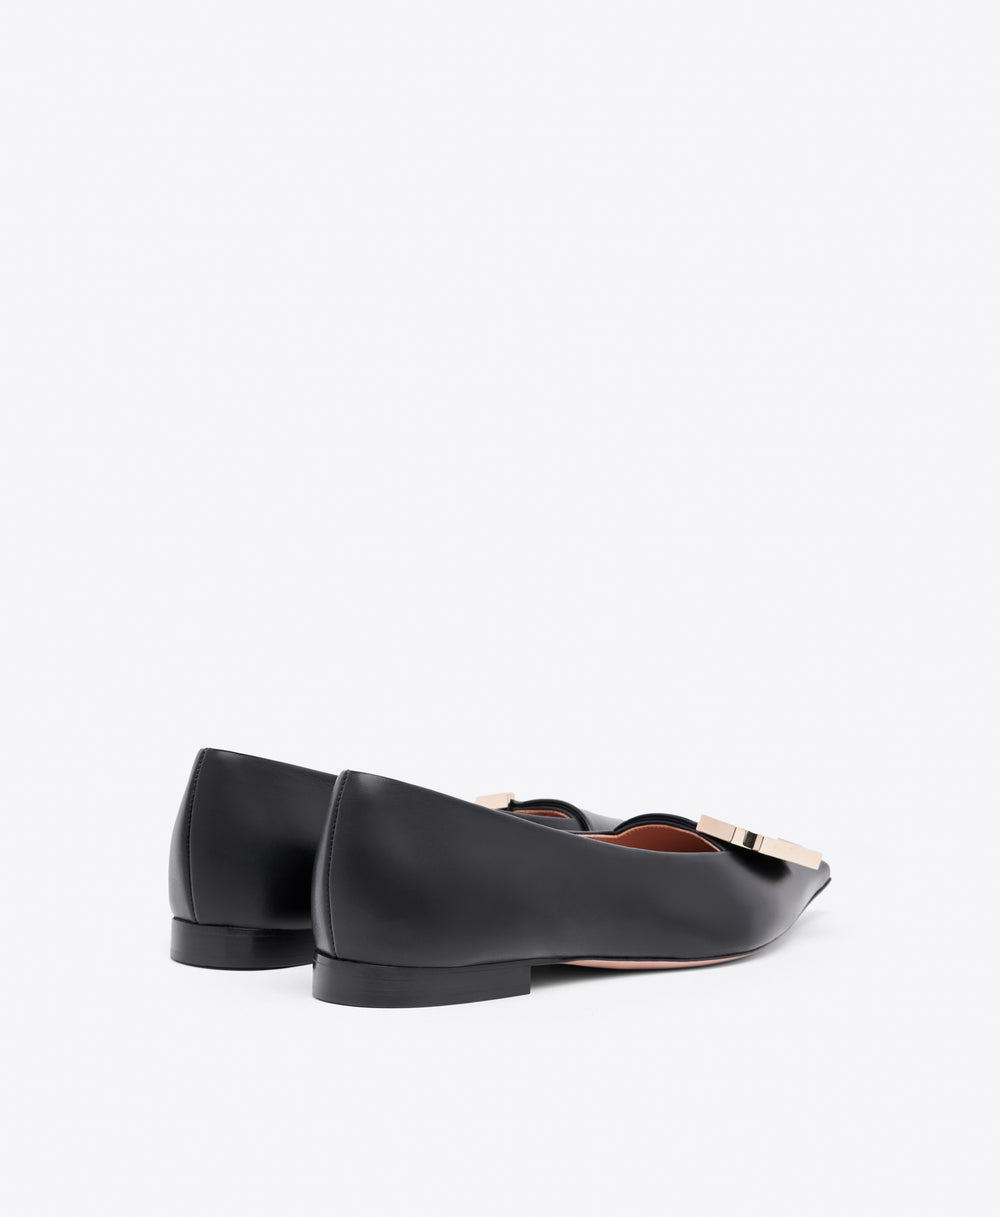 Hayes Flat Black Leather Flats Malone Souliers